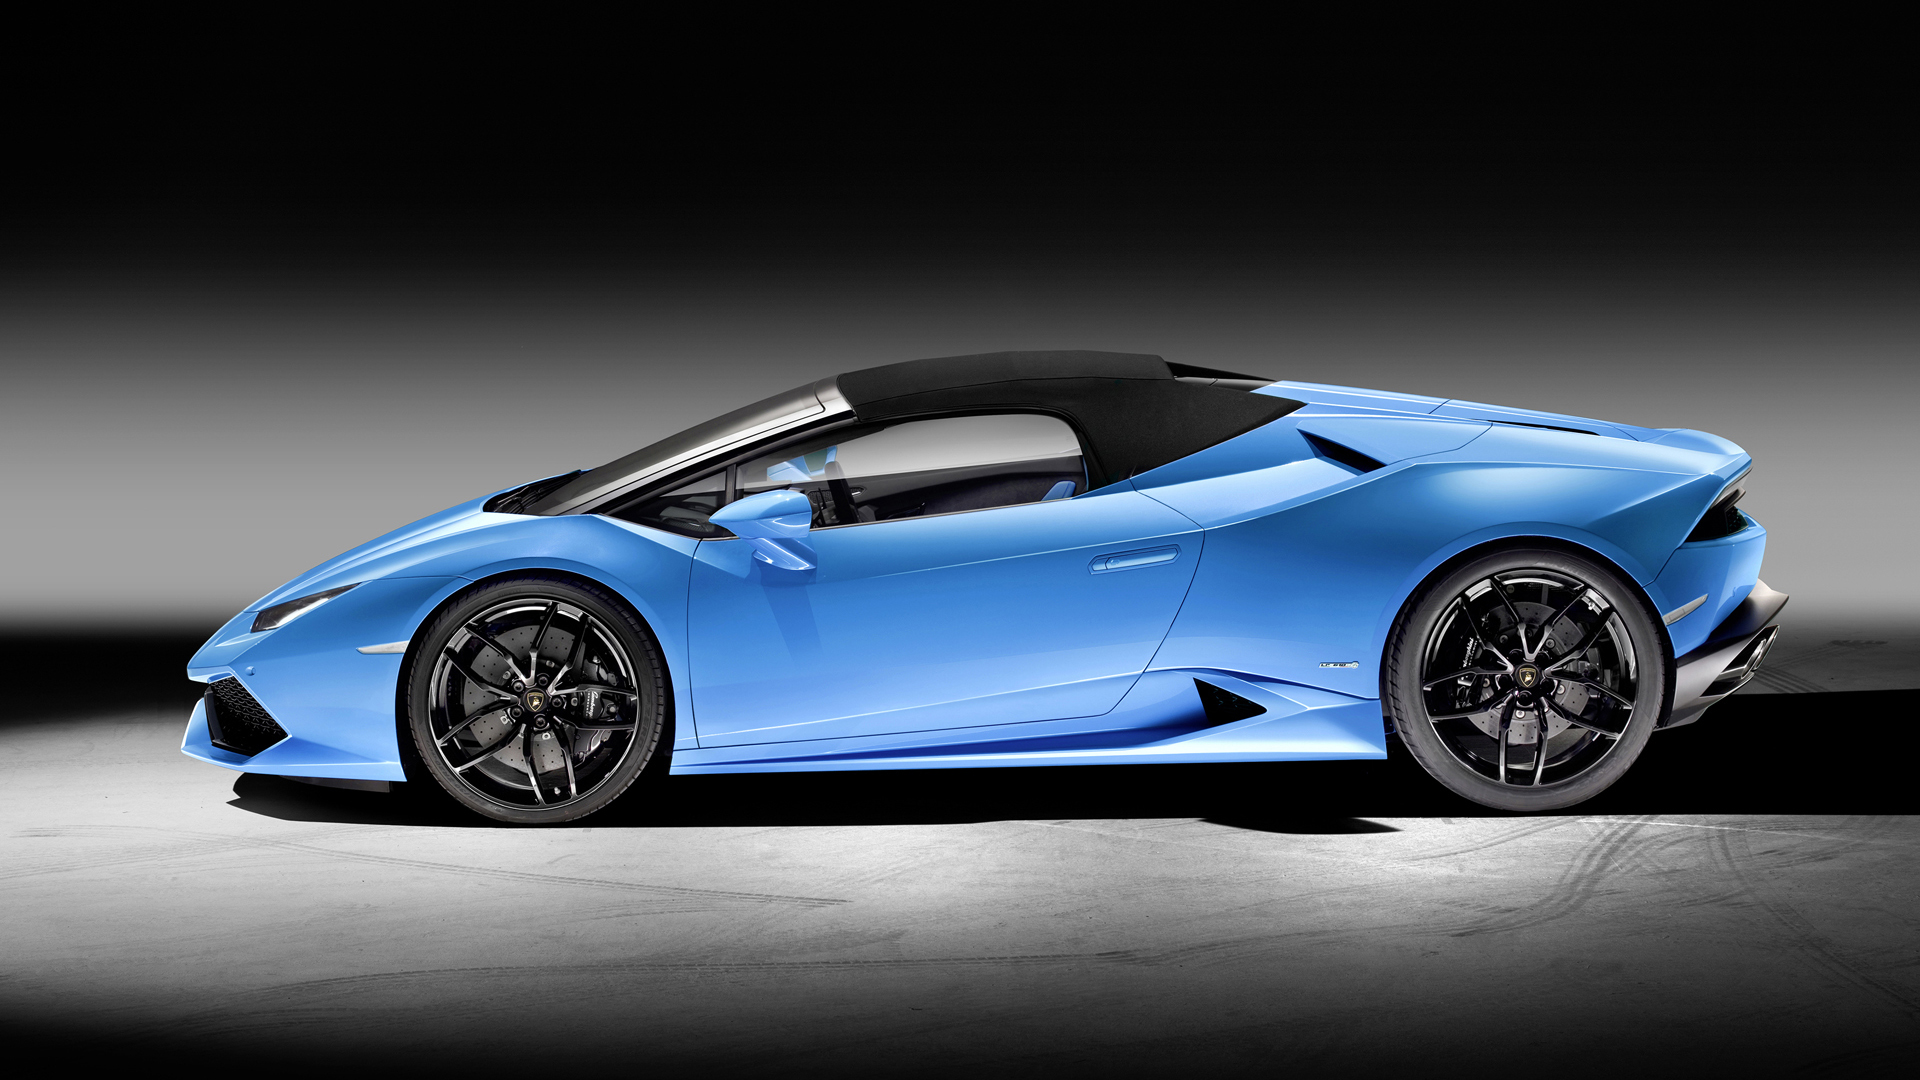 2017 Lamborghini Huracán LP 610-4 Spyder side profile with roof up